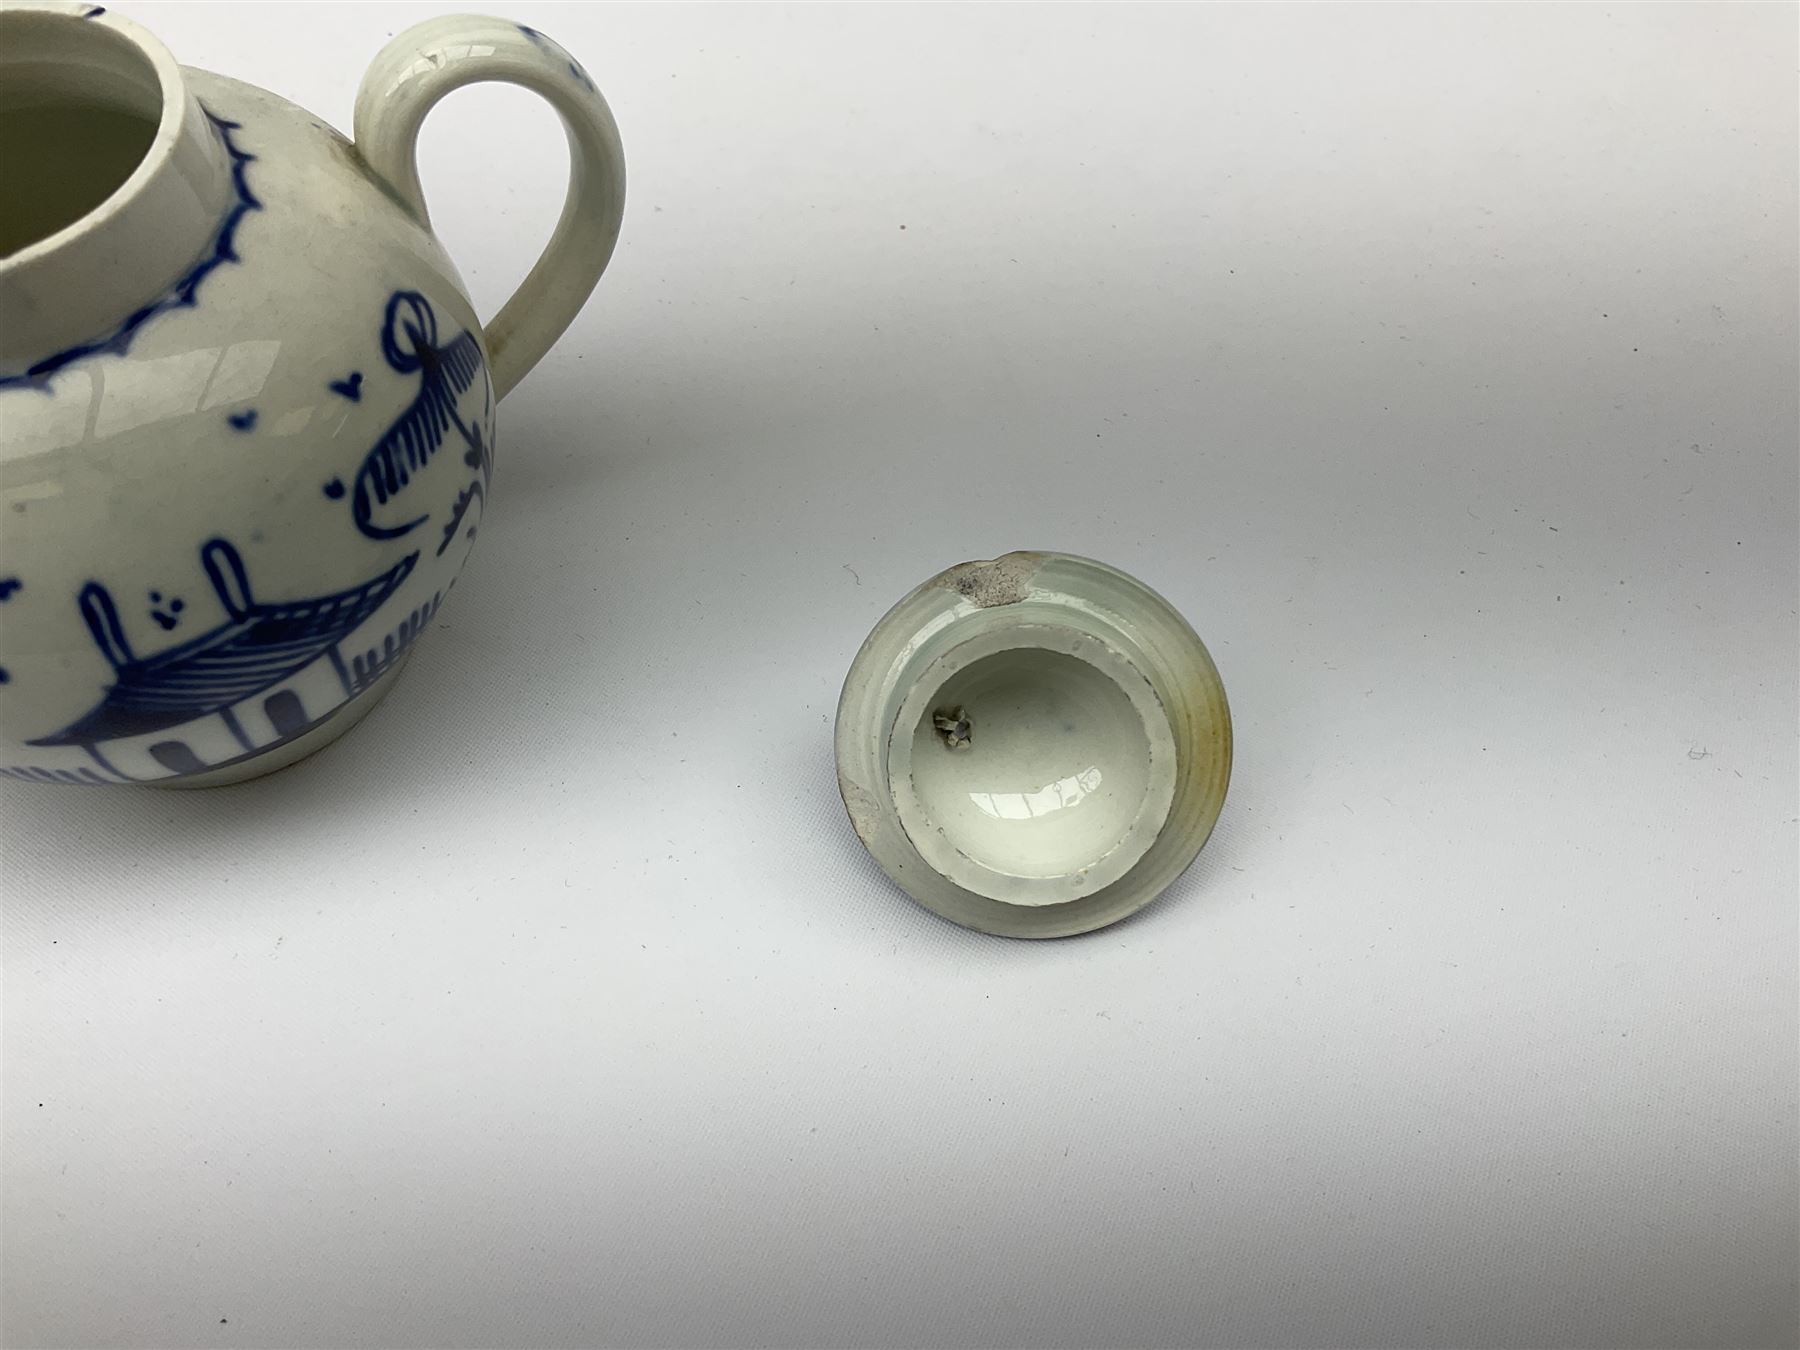 Two 18th century miniature or toy pearlware teapots - Image 3 of 8